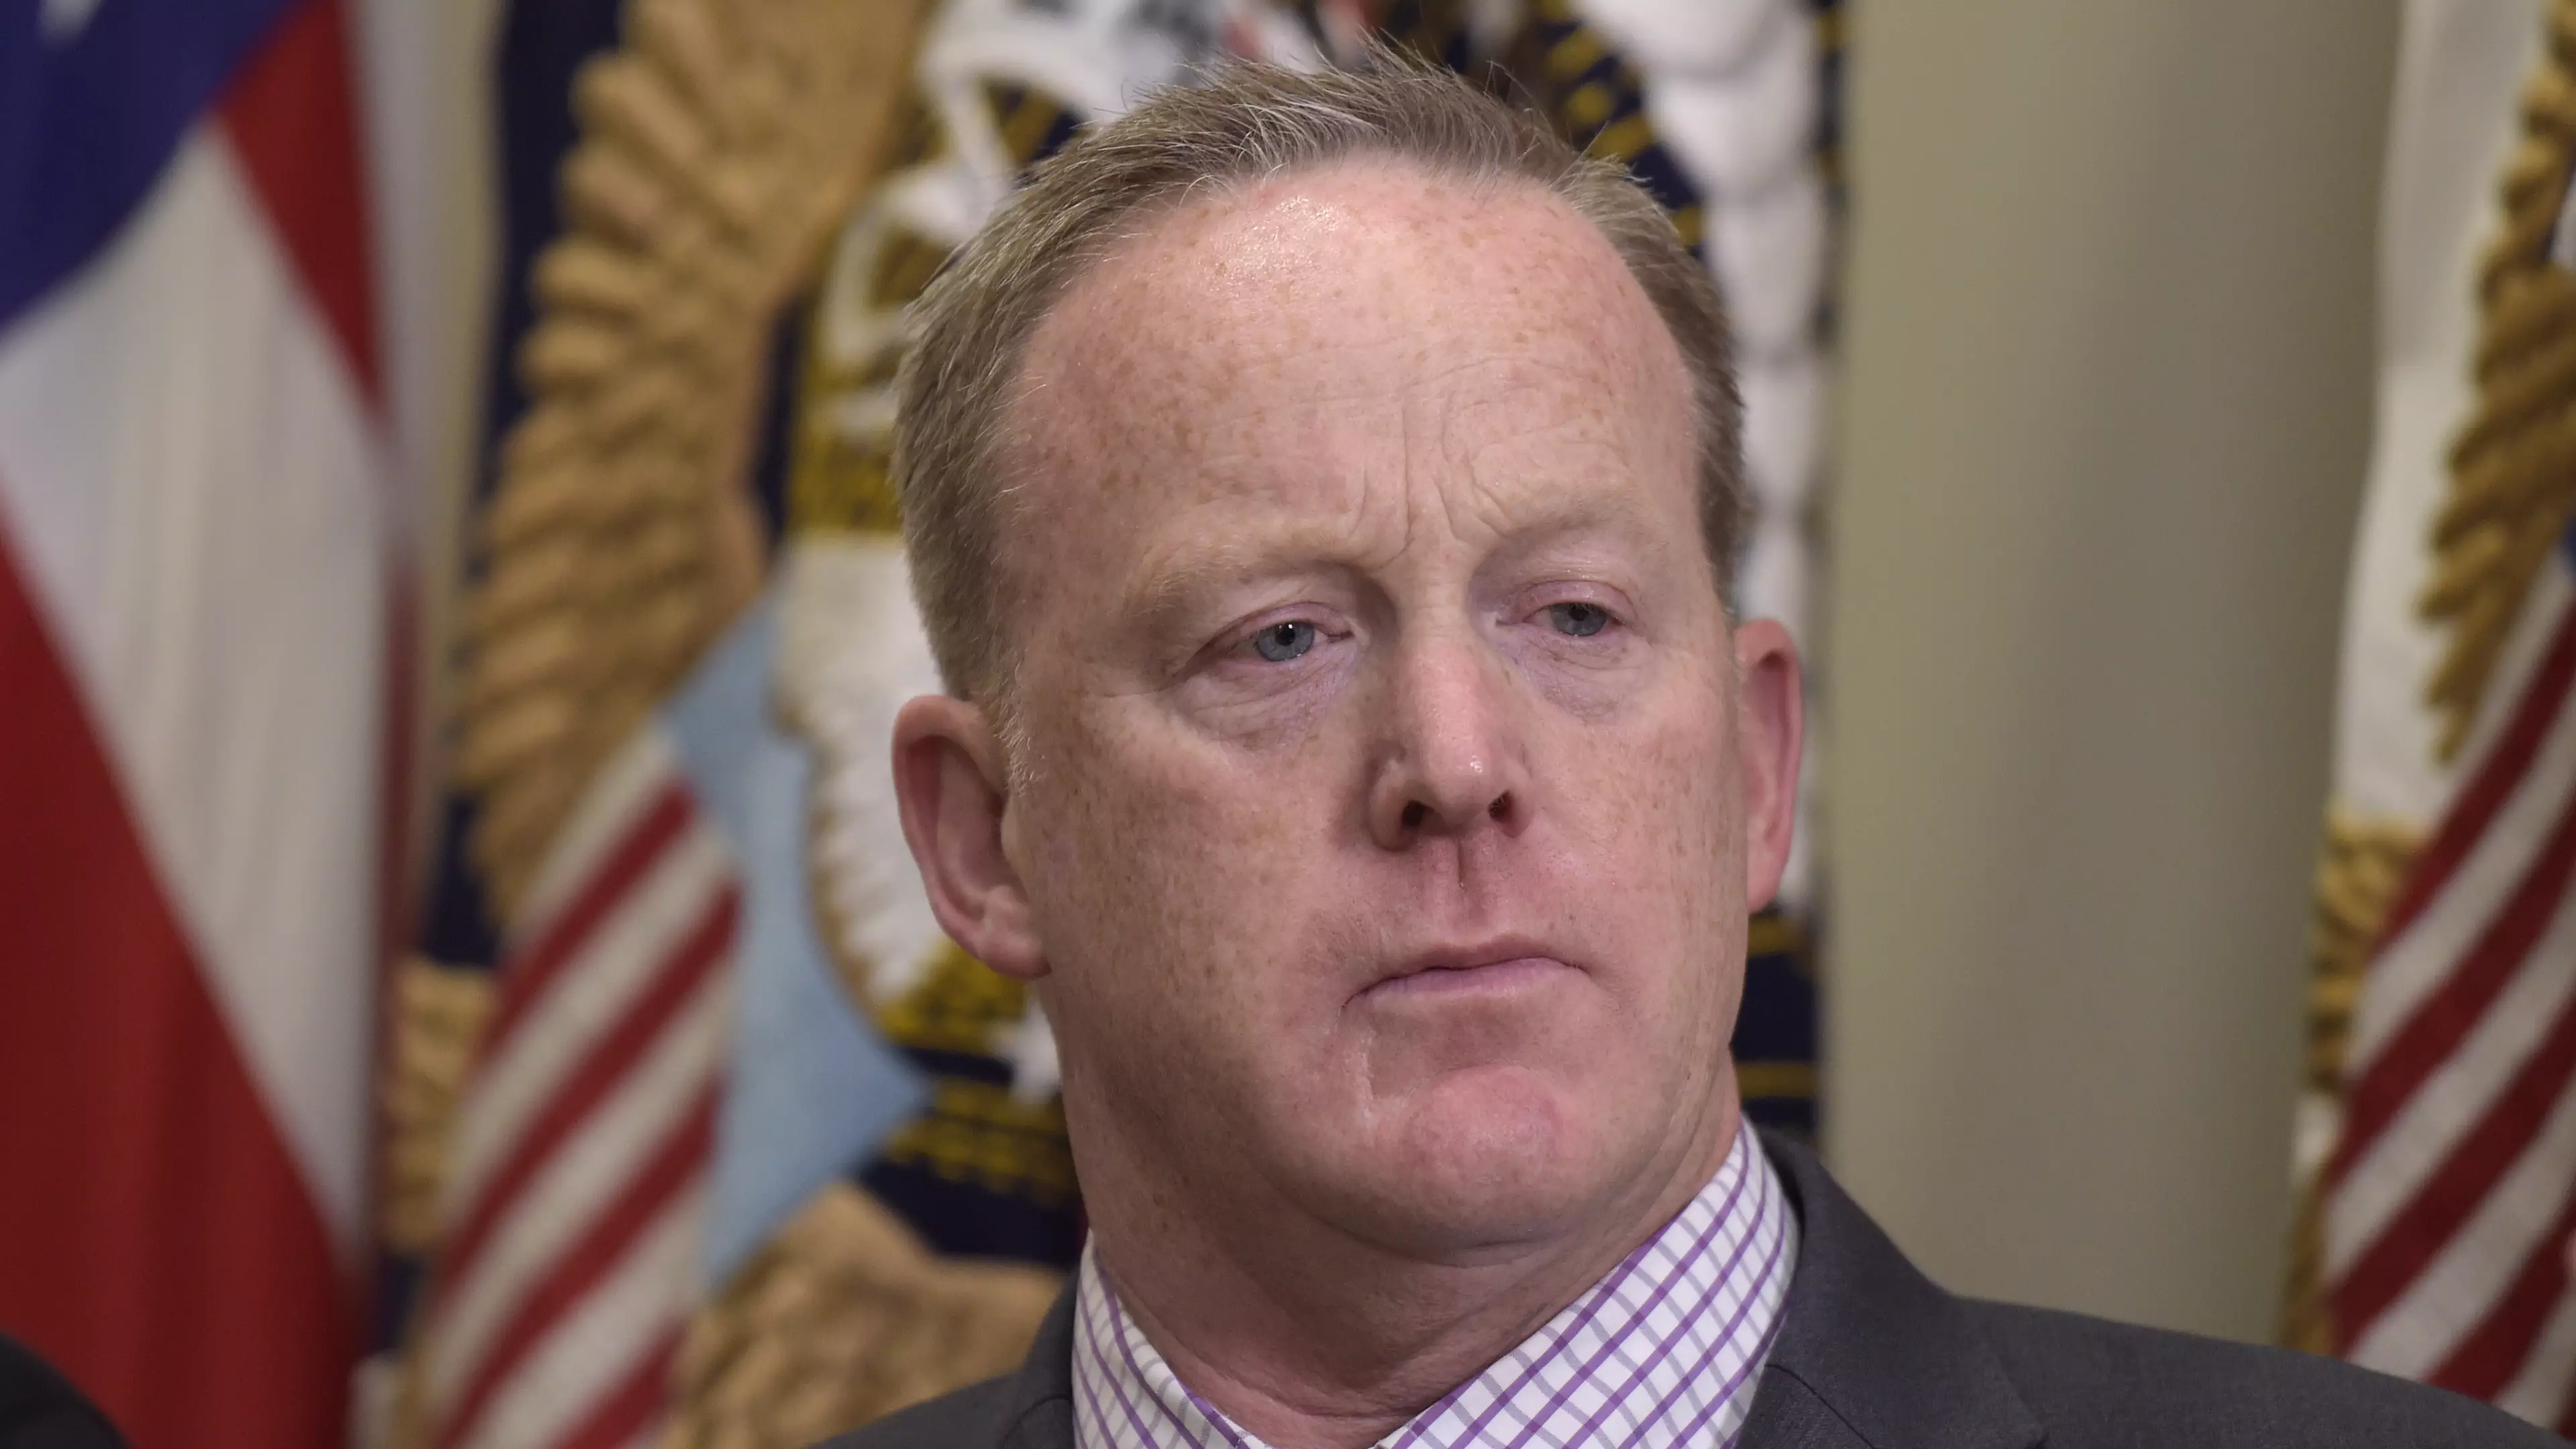 Sean Spicer Is Looking For A Reduced Role In The White House